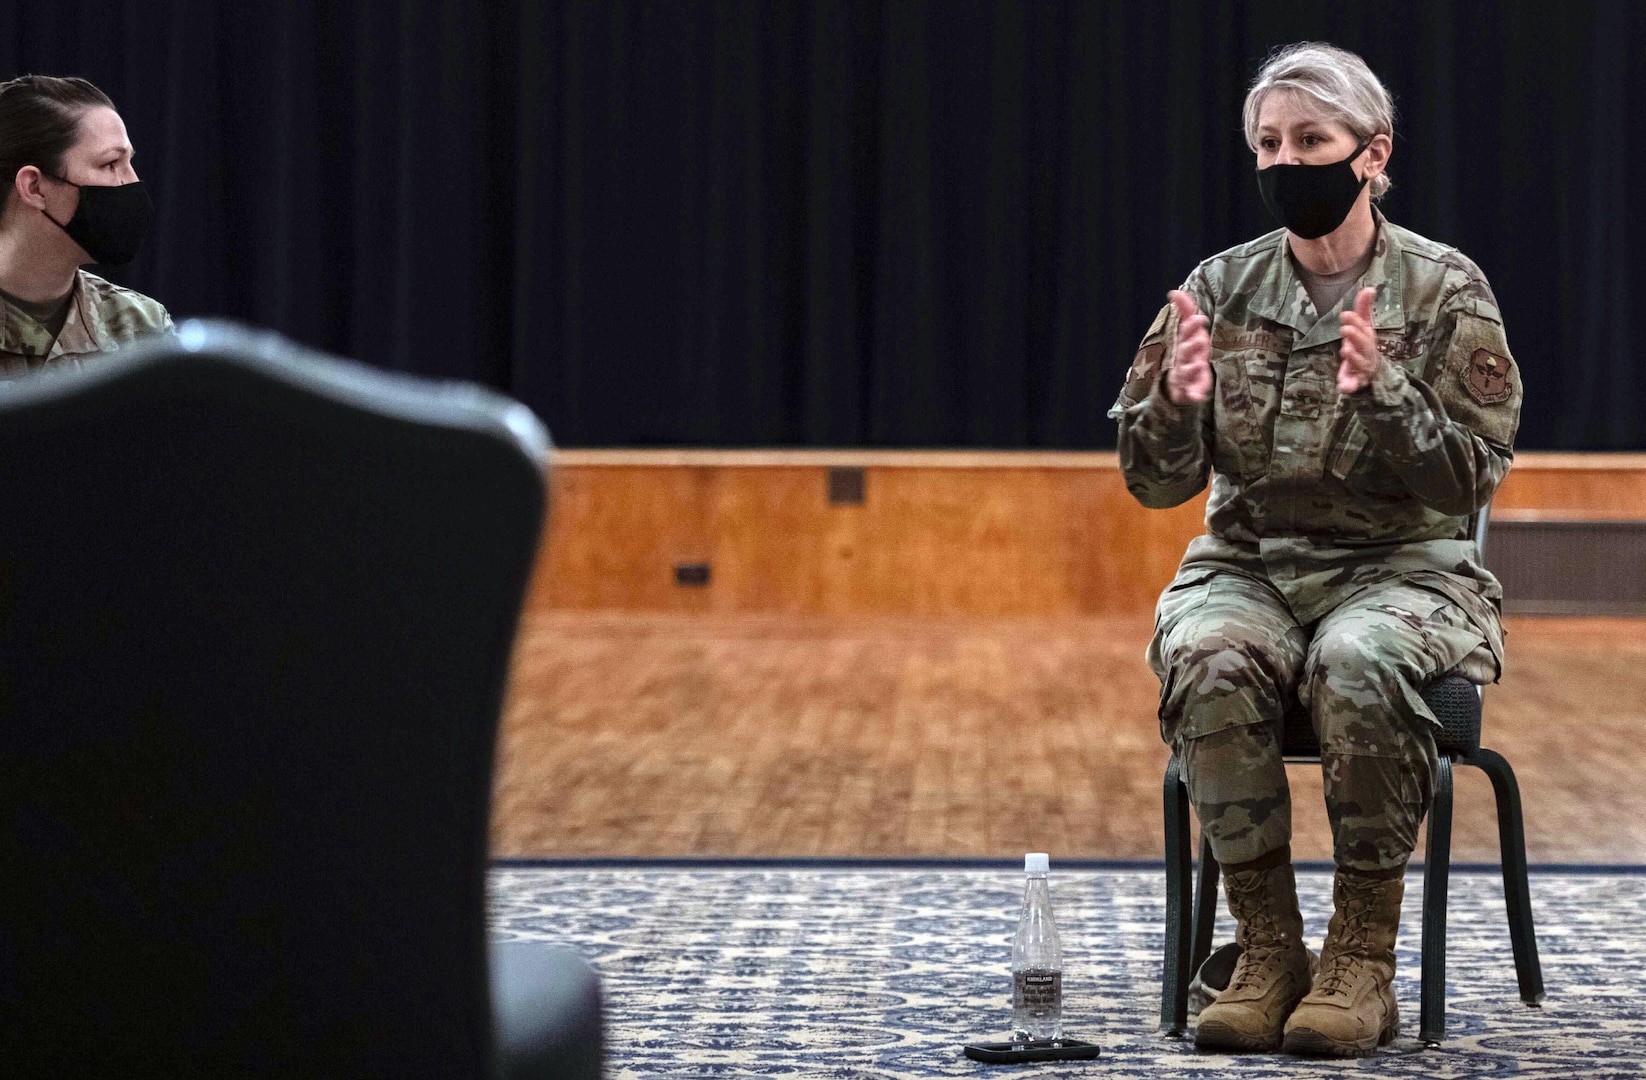 U. S. Air Force Brig. Gen Caroline M. Miller, 502nd Air Base Wing and Joint Base San Antonio commander, speaks to a group of Airmen and JBSA members during a tough conversation roundtable at Joint Base San Antonio-Randolph April 14. Miller expressed to them how these beliefs are damaging and why diversity is important in the military.